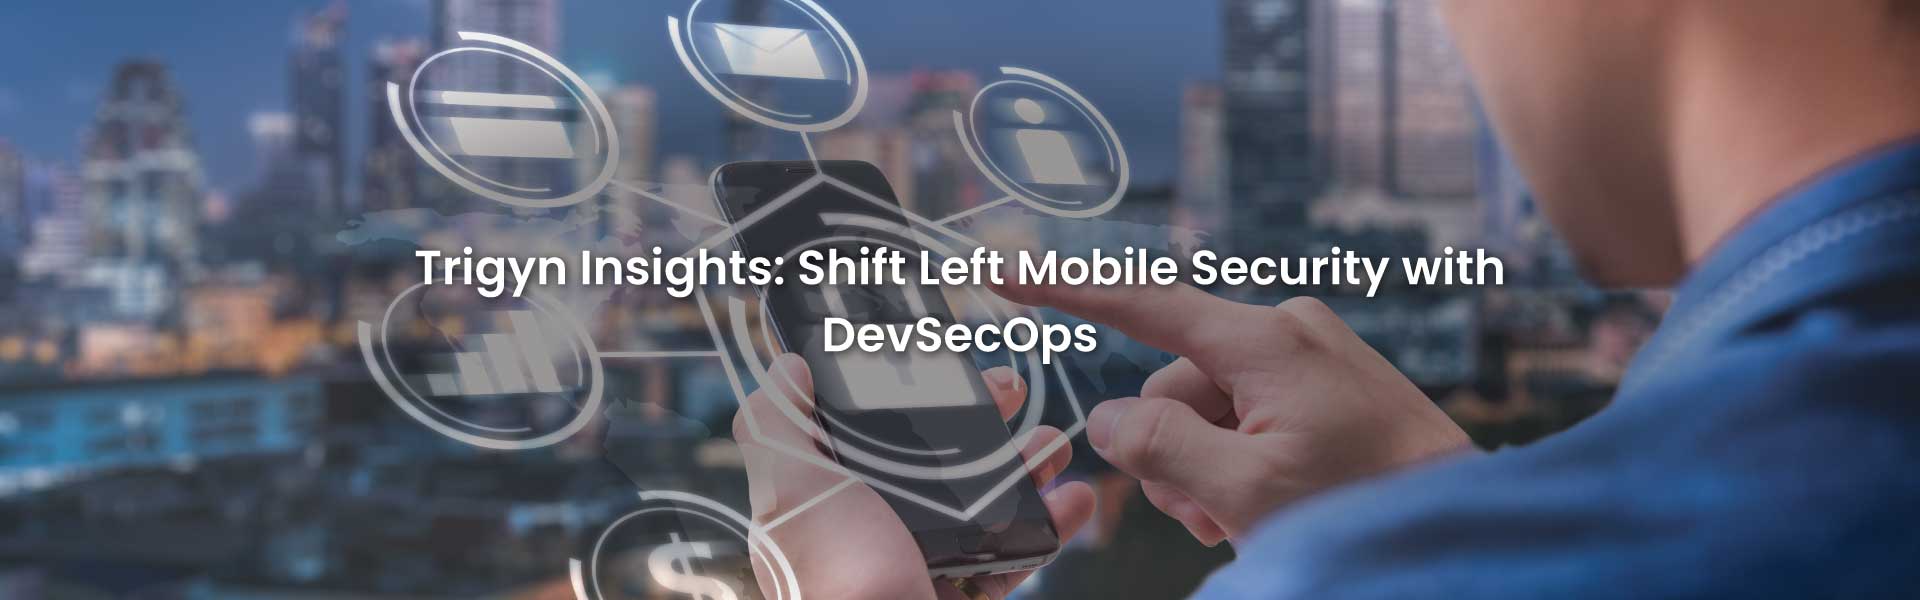 Mobile Security with DevSecOps